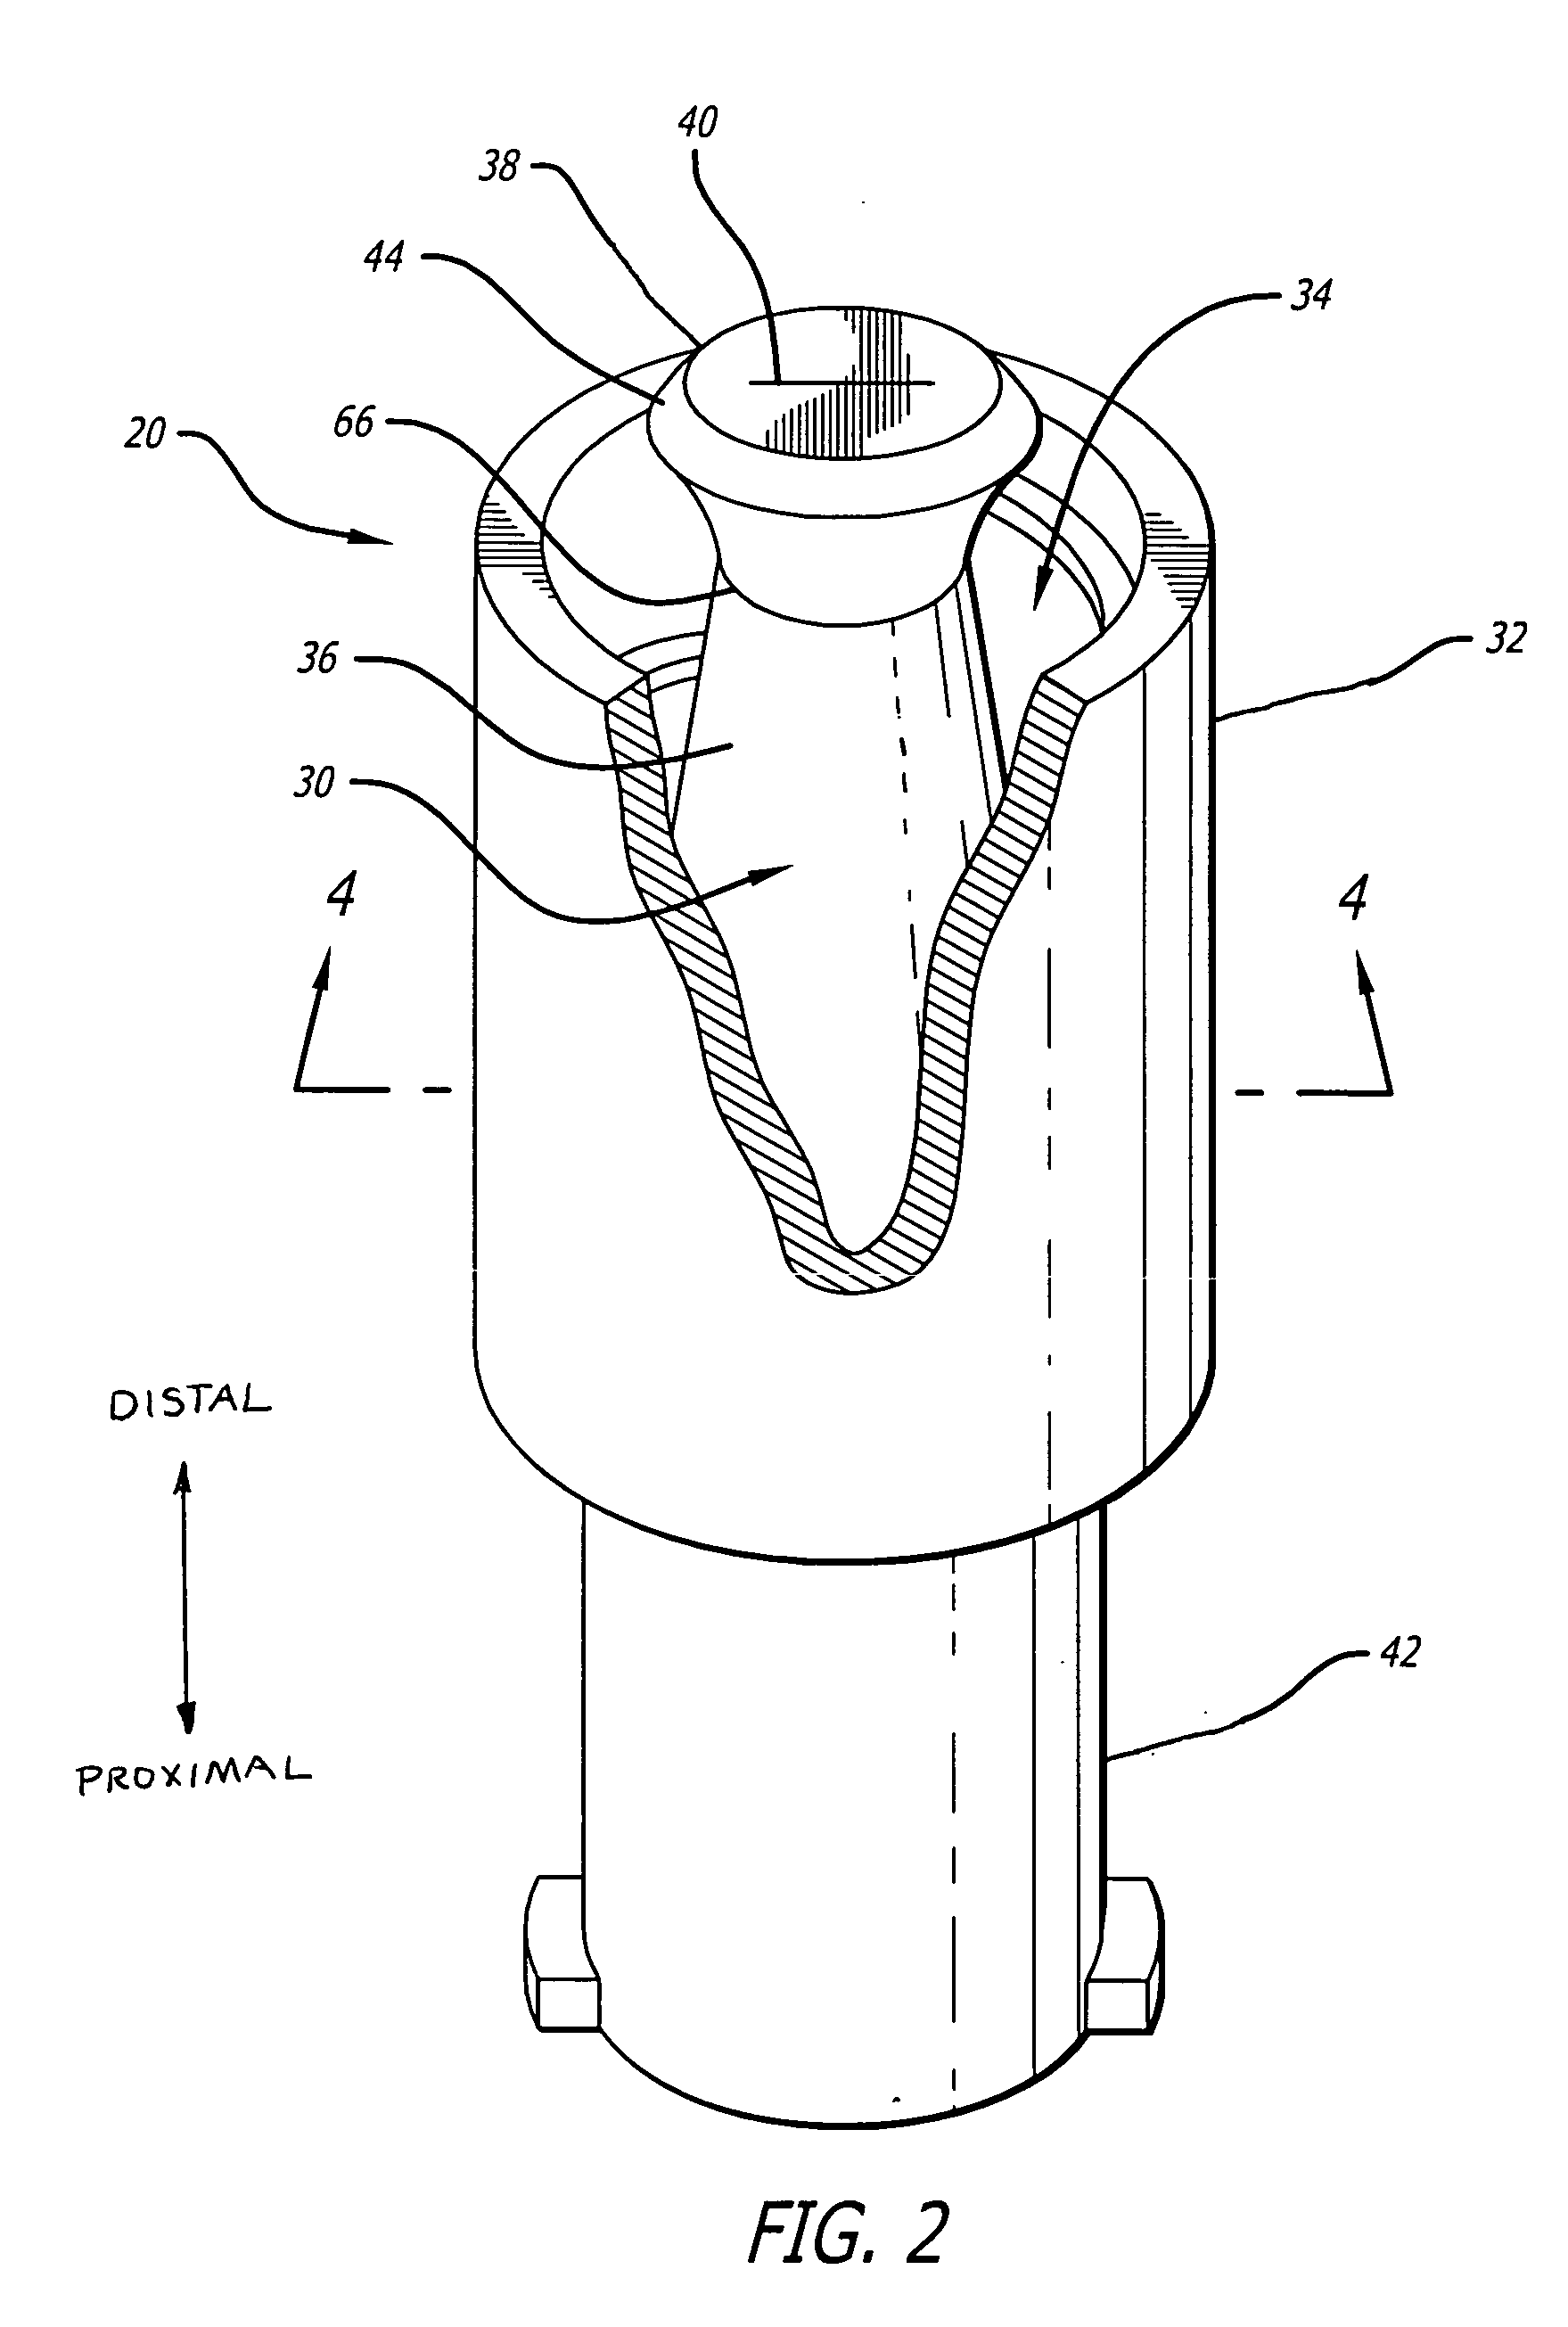 Self-sealing male Luer connector with molded elastomeric tip